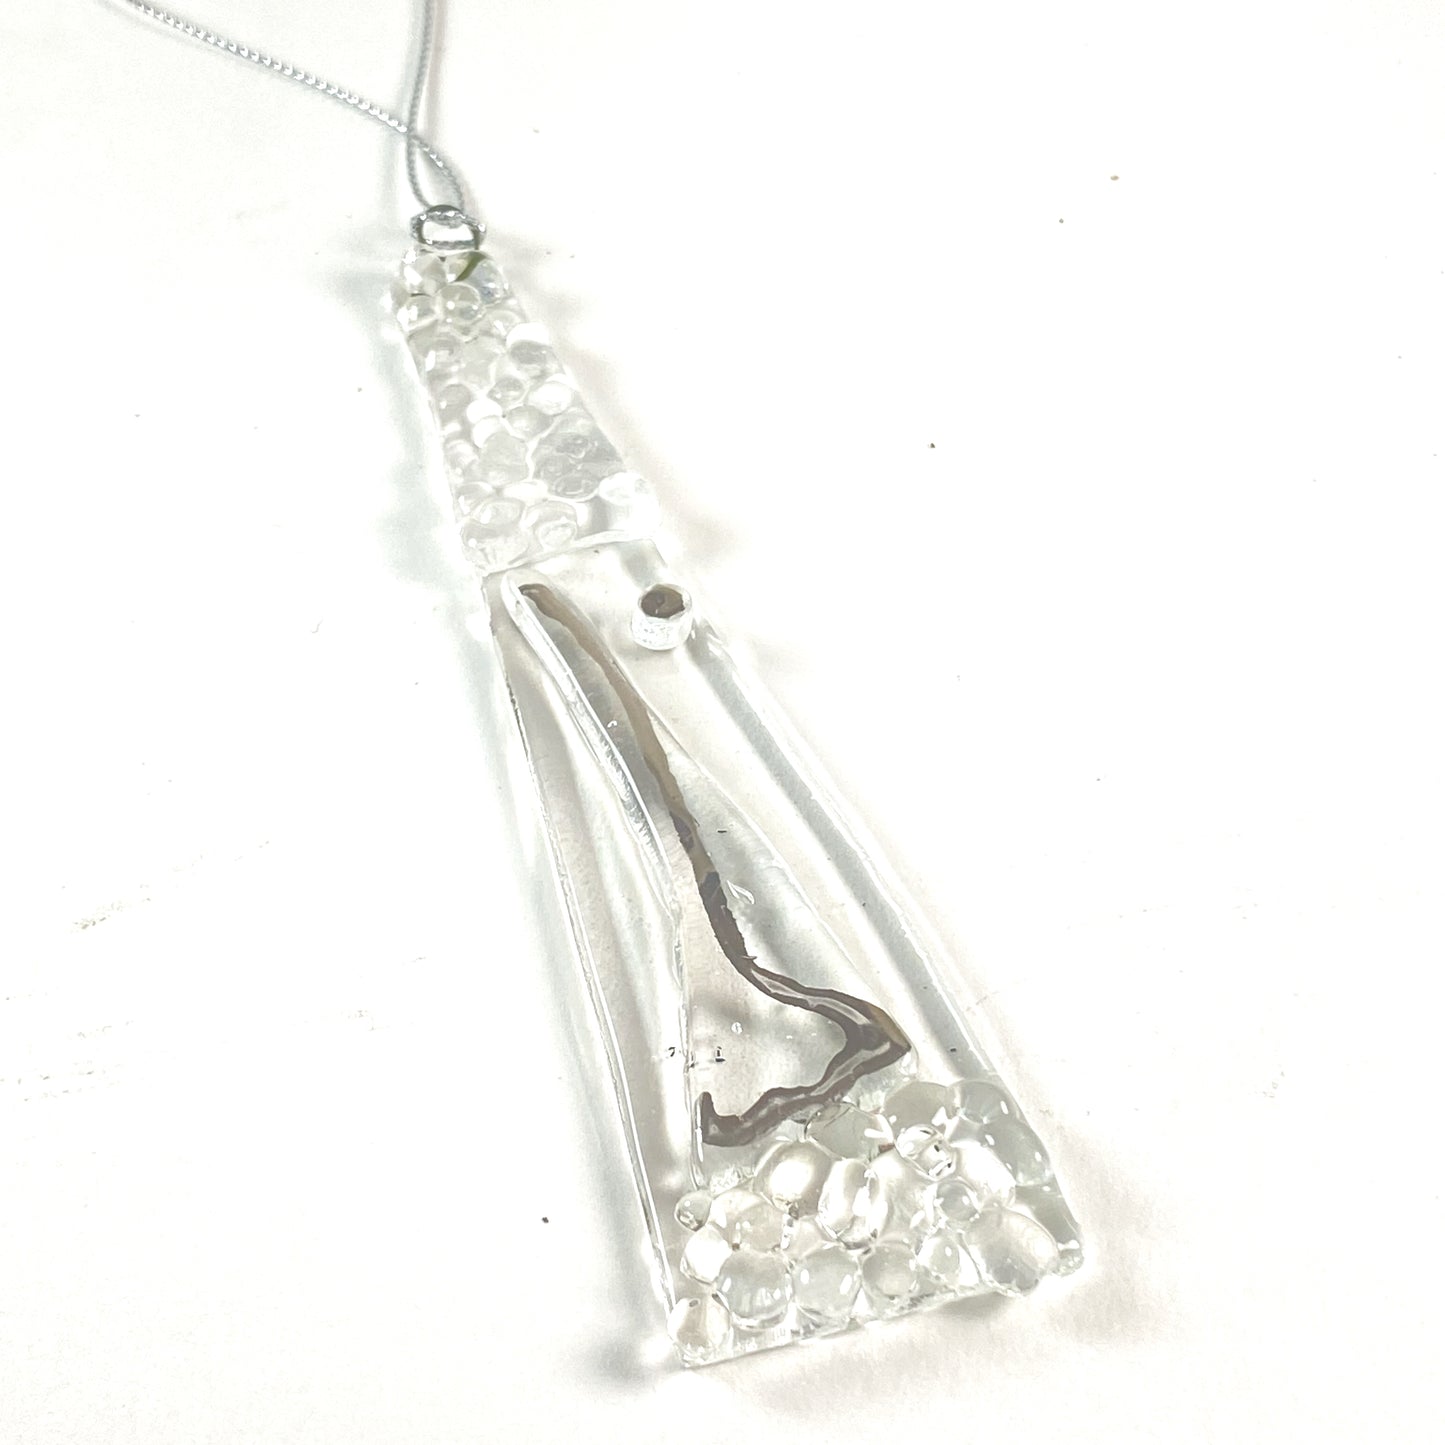 Abstract Clear Ornament Silver Luster #19